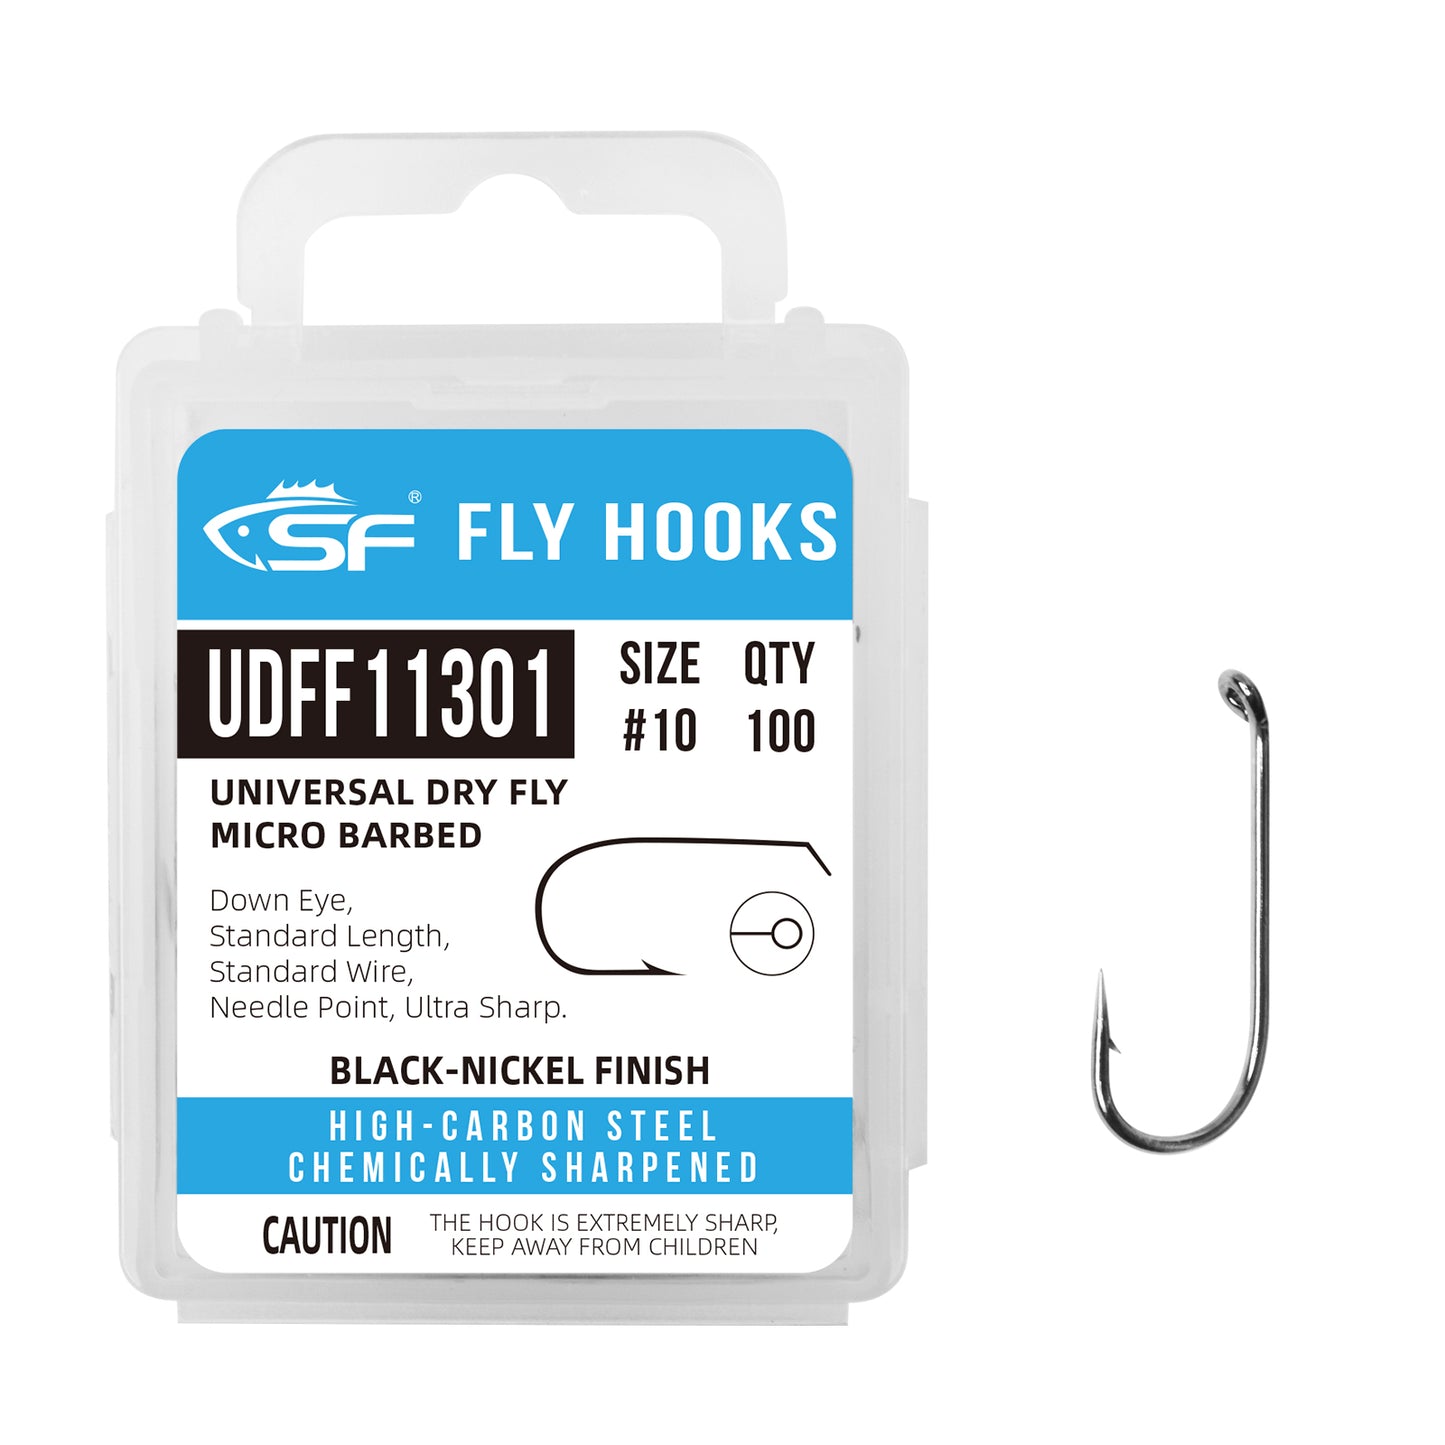 SF Standard Dry Fly Tying Hook Micro Barbed for Traditional Dry Flies with Mini Box #10 #12 #14 #16 100Pcs